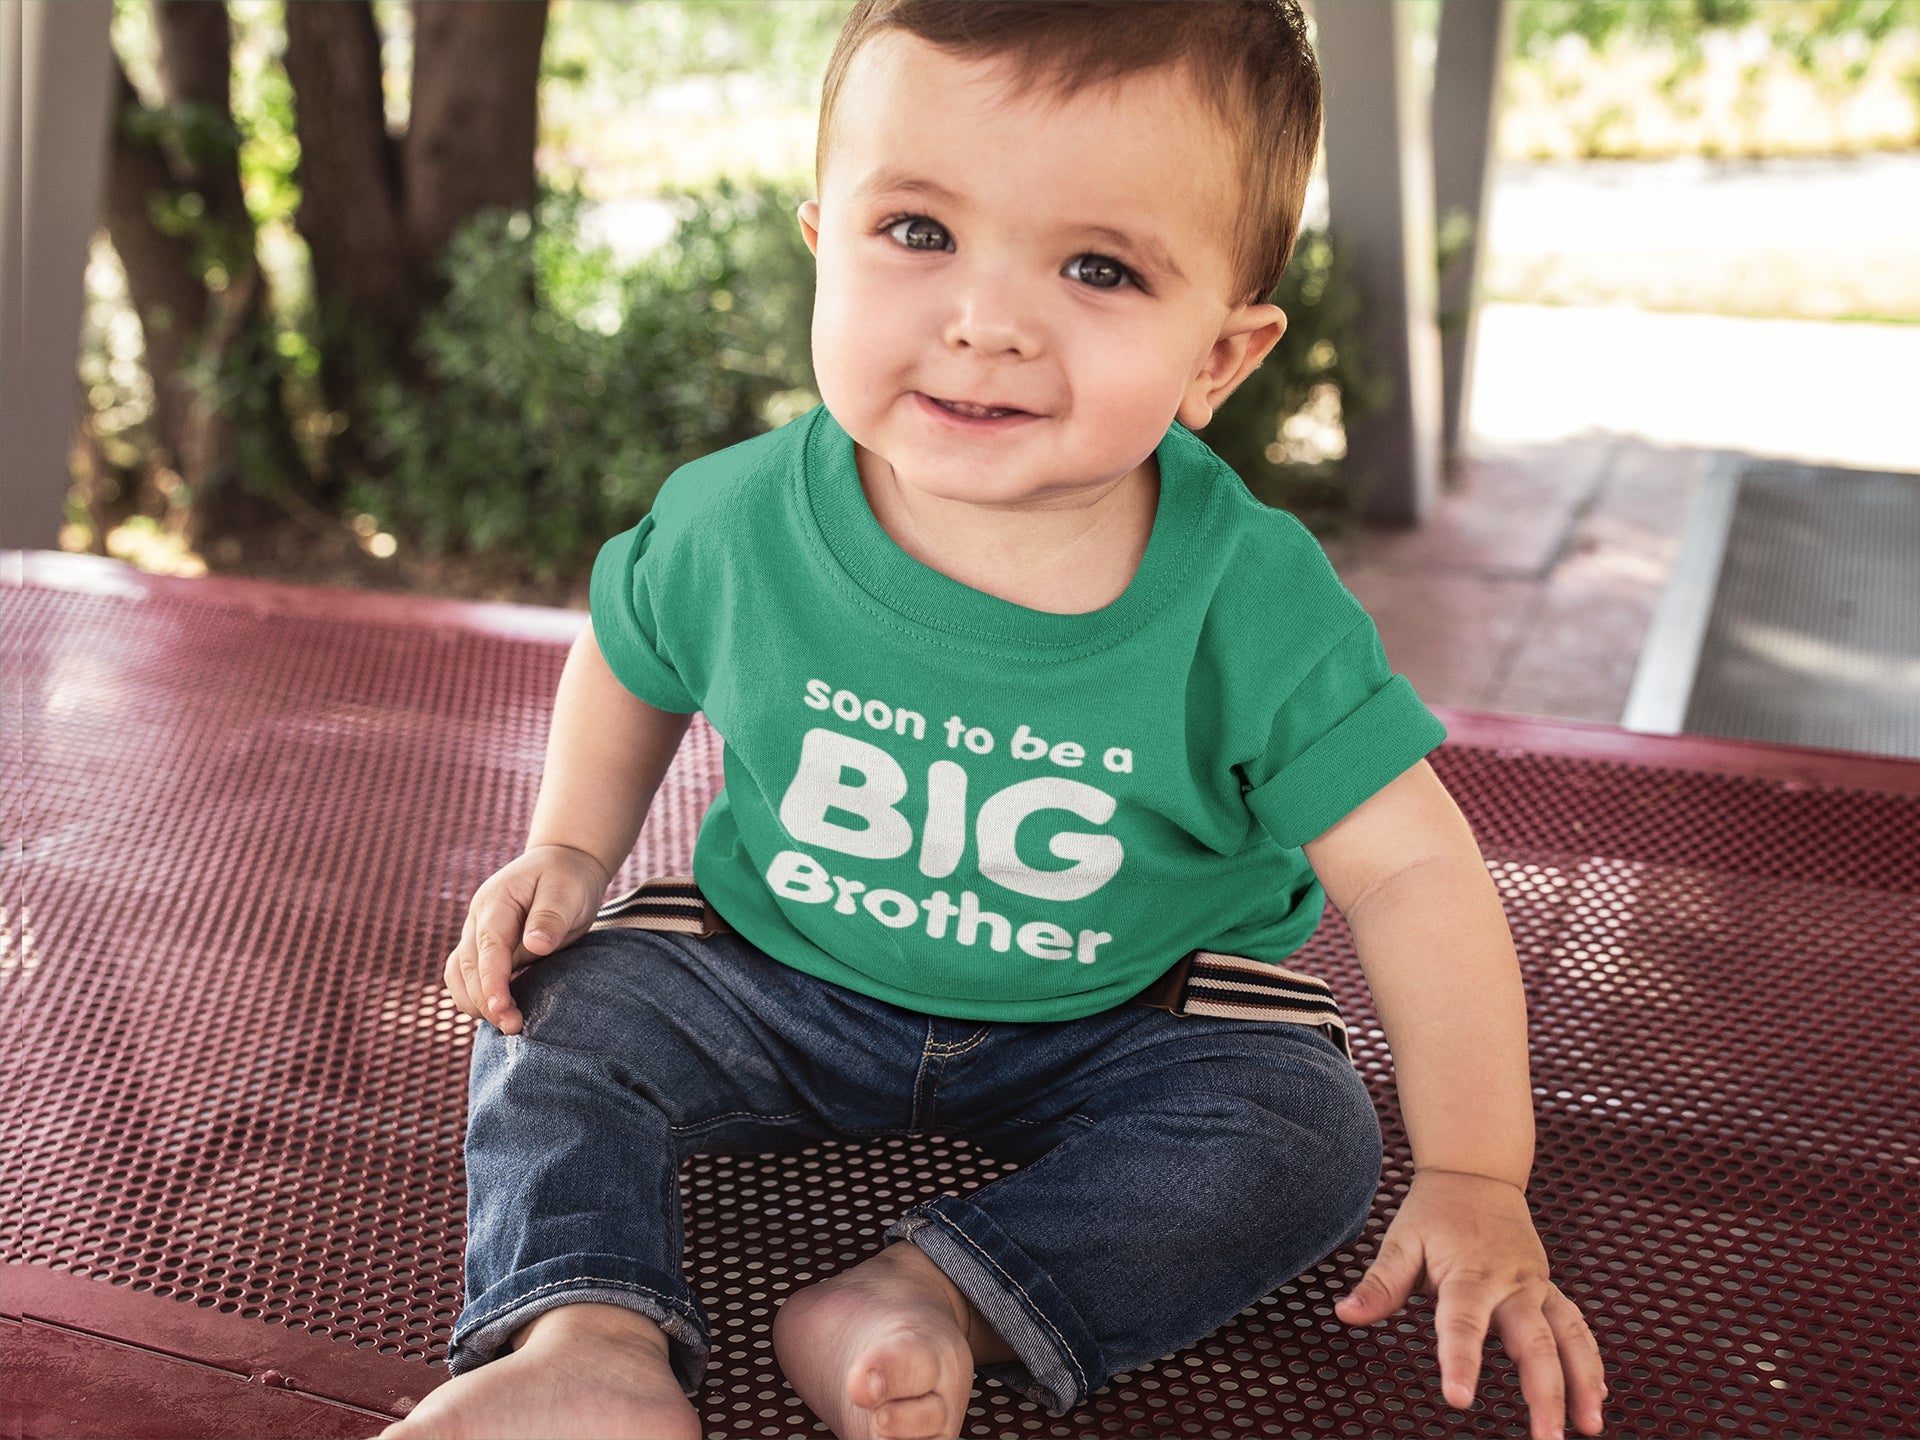 Soon to be a BIG BROTHER Infant/Toddler  (#590-7)